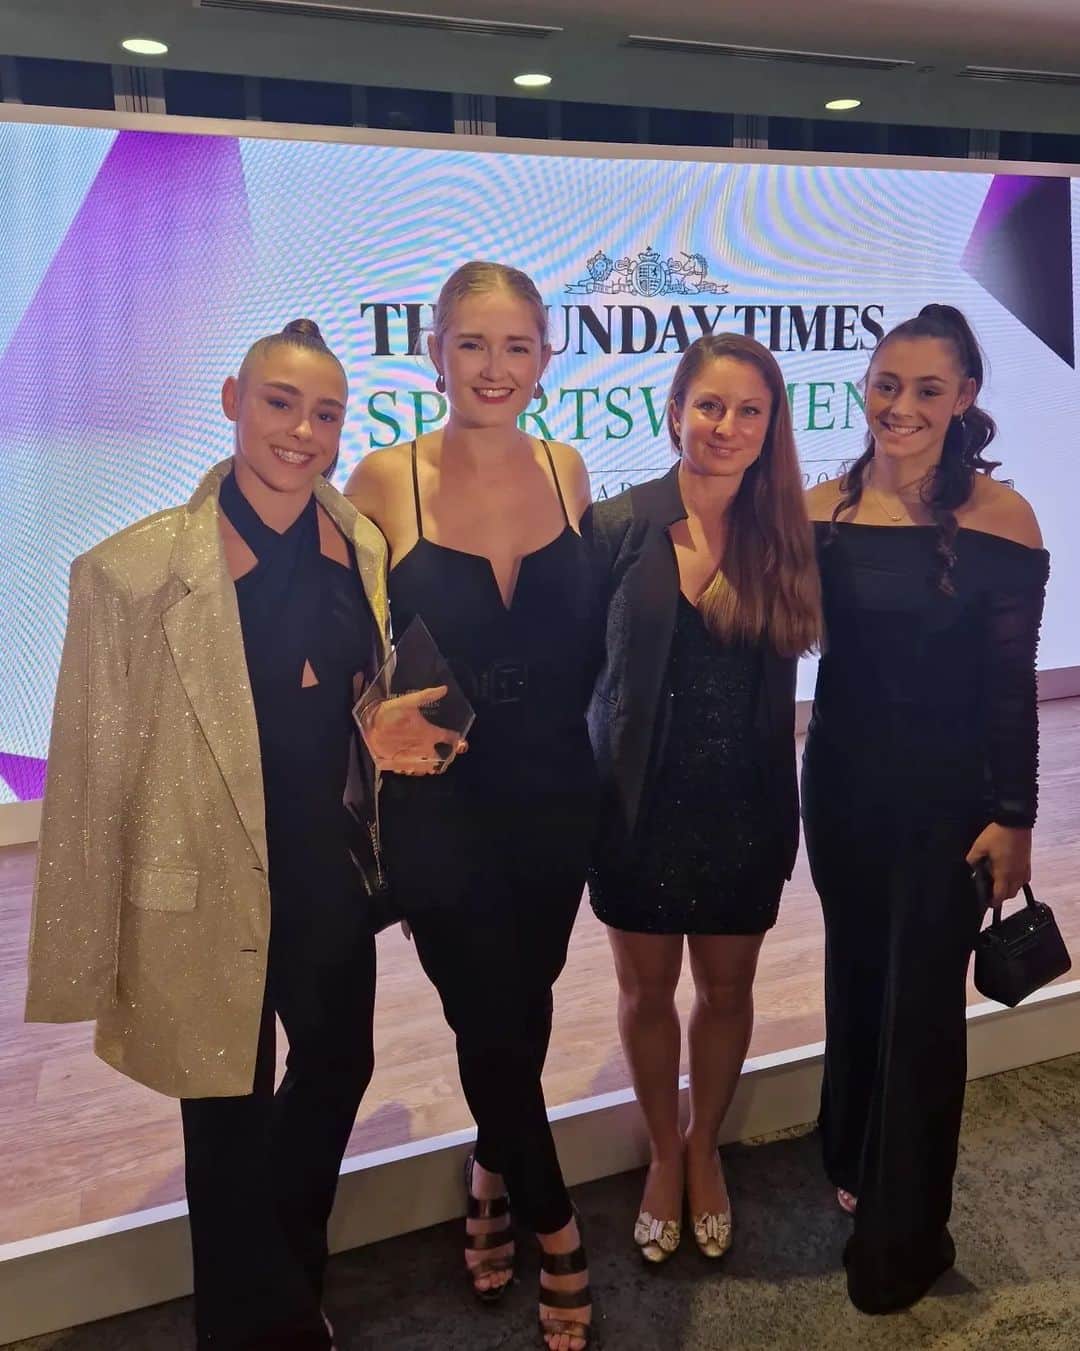 ジェニファー・ピンチズのインスタグラム：「What an honour to be part of the @timessport #SWOTY Awards this week, in a room full of such inspiring and strong women 💪 Congratulations to all the nominees and award winners including the lovely @jessica_gadirova! 🌟  When gymnasts first started speaking out via #gymnastalliance and the media in 2020, we received a lot of backlash from those who didn't understand the extent of the problems in our sport... or frankly were complicit in it.  So for @gymnasts_for_change to be nominated for Changemaker of the Year by the Sunday Times in 2022, it really shows how far we have come, and helps to validate and celebrate the bravery of those many gymnasts who have spoken up - despite that backlash, and despite their own fears and insecurities from being told *they were the problem* by a culture that prioritised podiums over people.  Thank you to the Sunday Times and to everyone who has helped amplify our message and gymnasts' voices over the past 2+ years ❤️ Gymnasts for Change represents and could not exist without hundreds of brave and passionate individuals; gymnasts, coaches, parents, fans, club staff and more, who have voluntarily spent their time to stand up for redress and reform.  We're not there yet... we need closure on cases and reparation for those who've been hurt. We new laws that protect athletes in the same way students are protected in schools. We need a sports ombudsman, as Baroness @tannigreythompson DBE recommended years ago. We need better education and awareness, still. We need to survivor representation more widely across BG, including at board level. We need to collaboate with other sports and nations. And much more.  But we have come a long way, and we look forward to continuing to work with British Gymnastics to make this sport better and safer at every level. 💖」